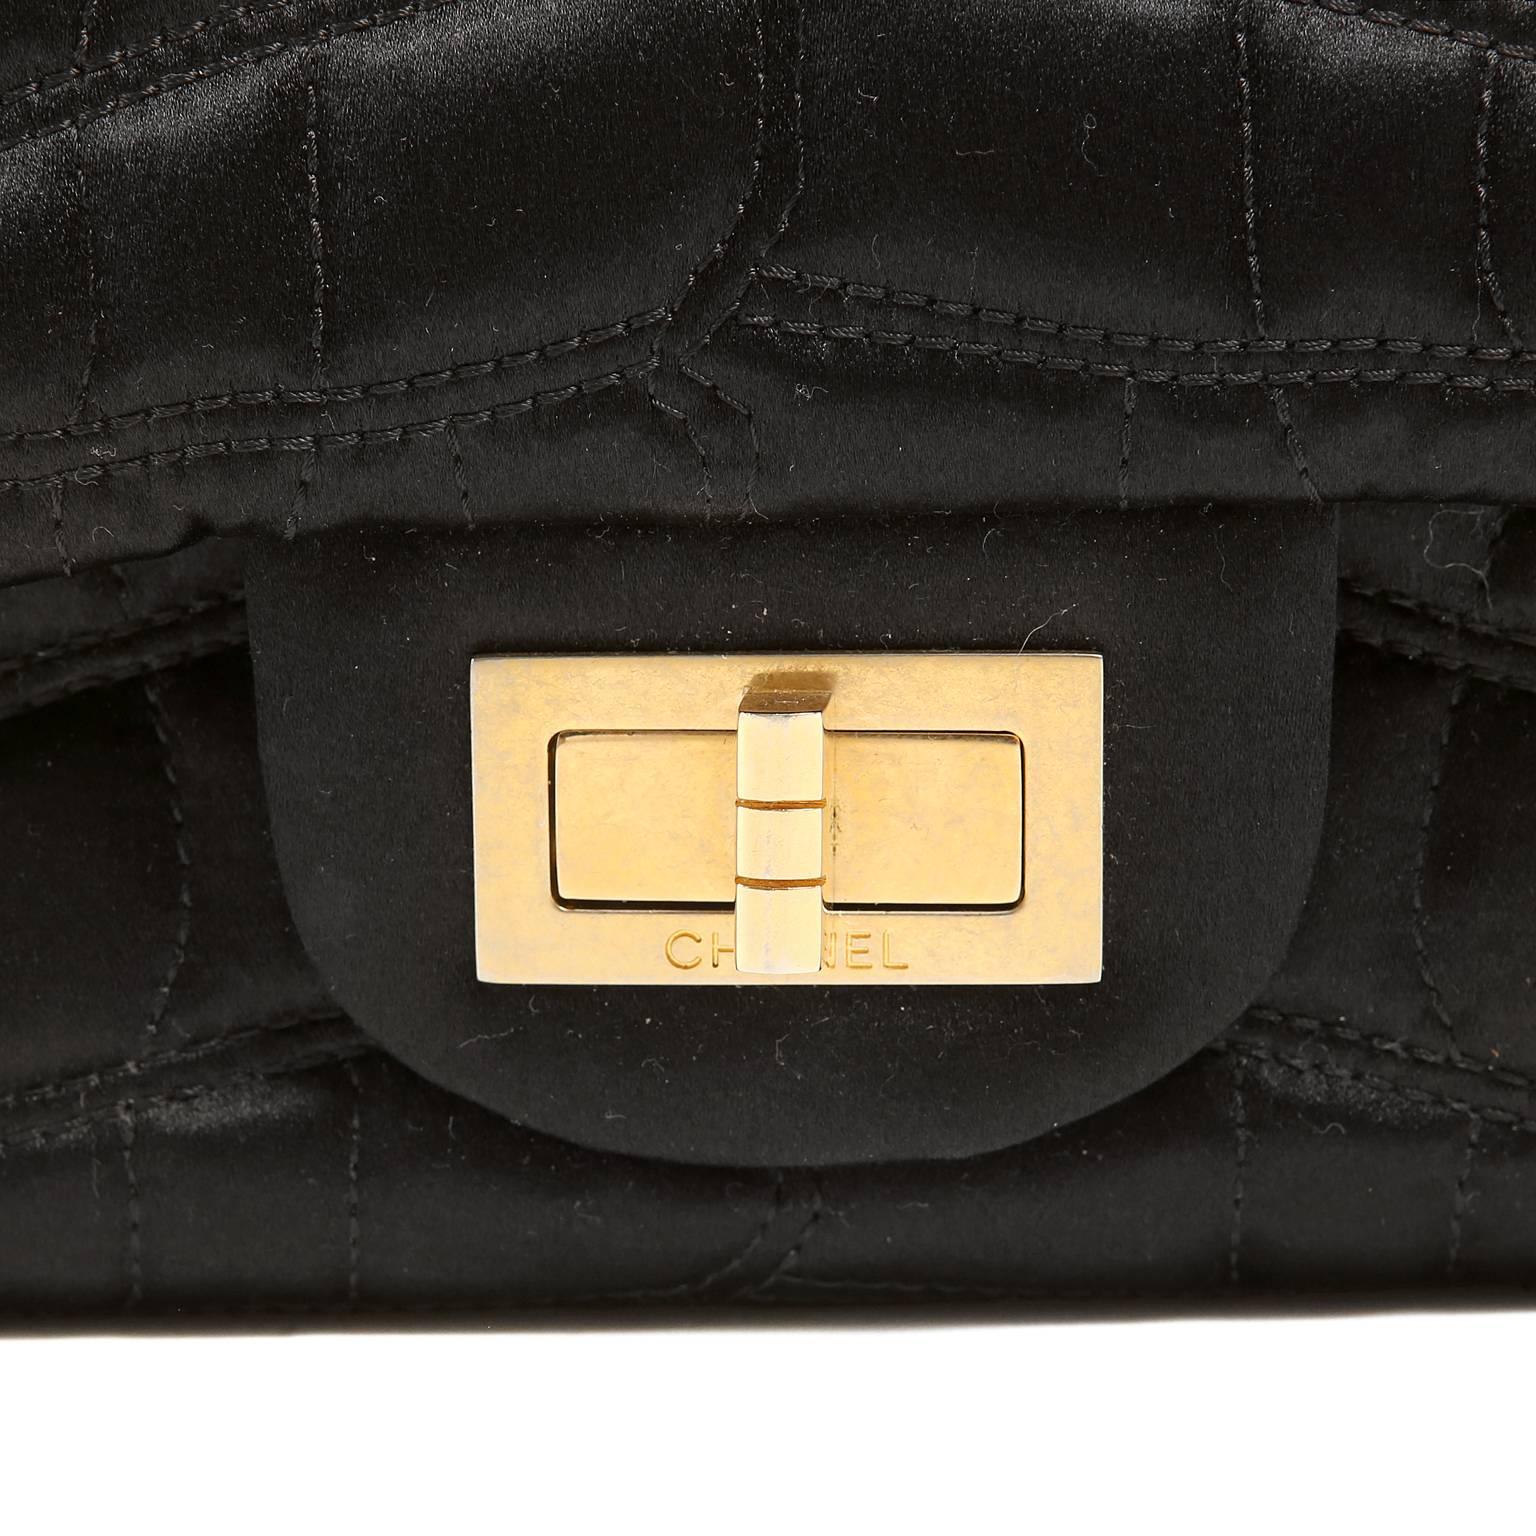 Chanel Black Satin Crocodile Quilted Reissue Flap Bag 1